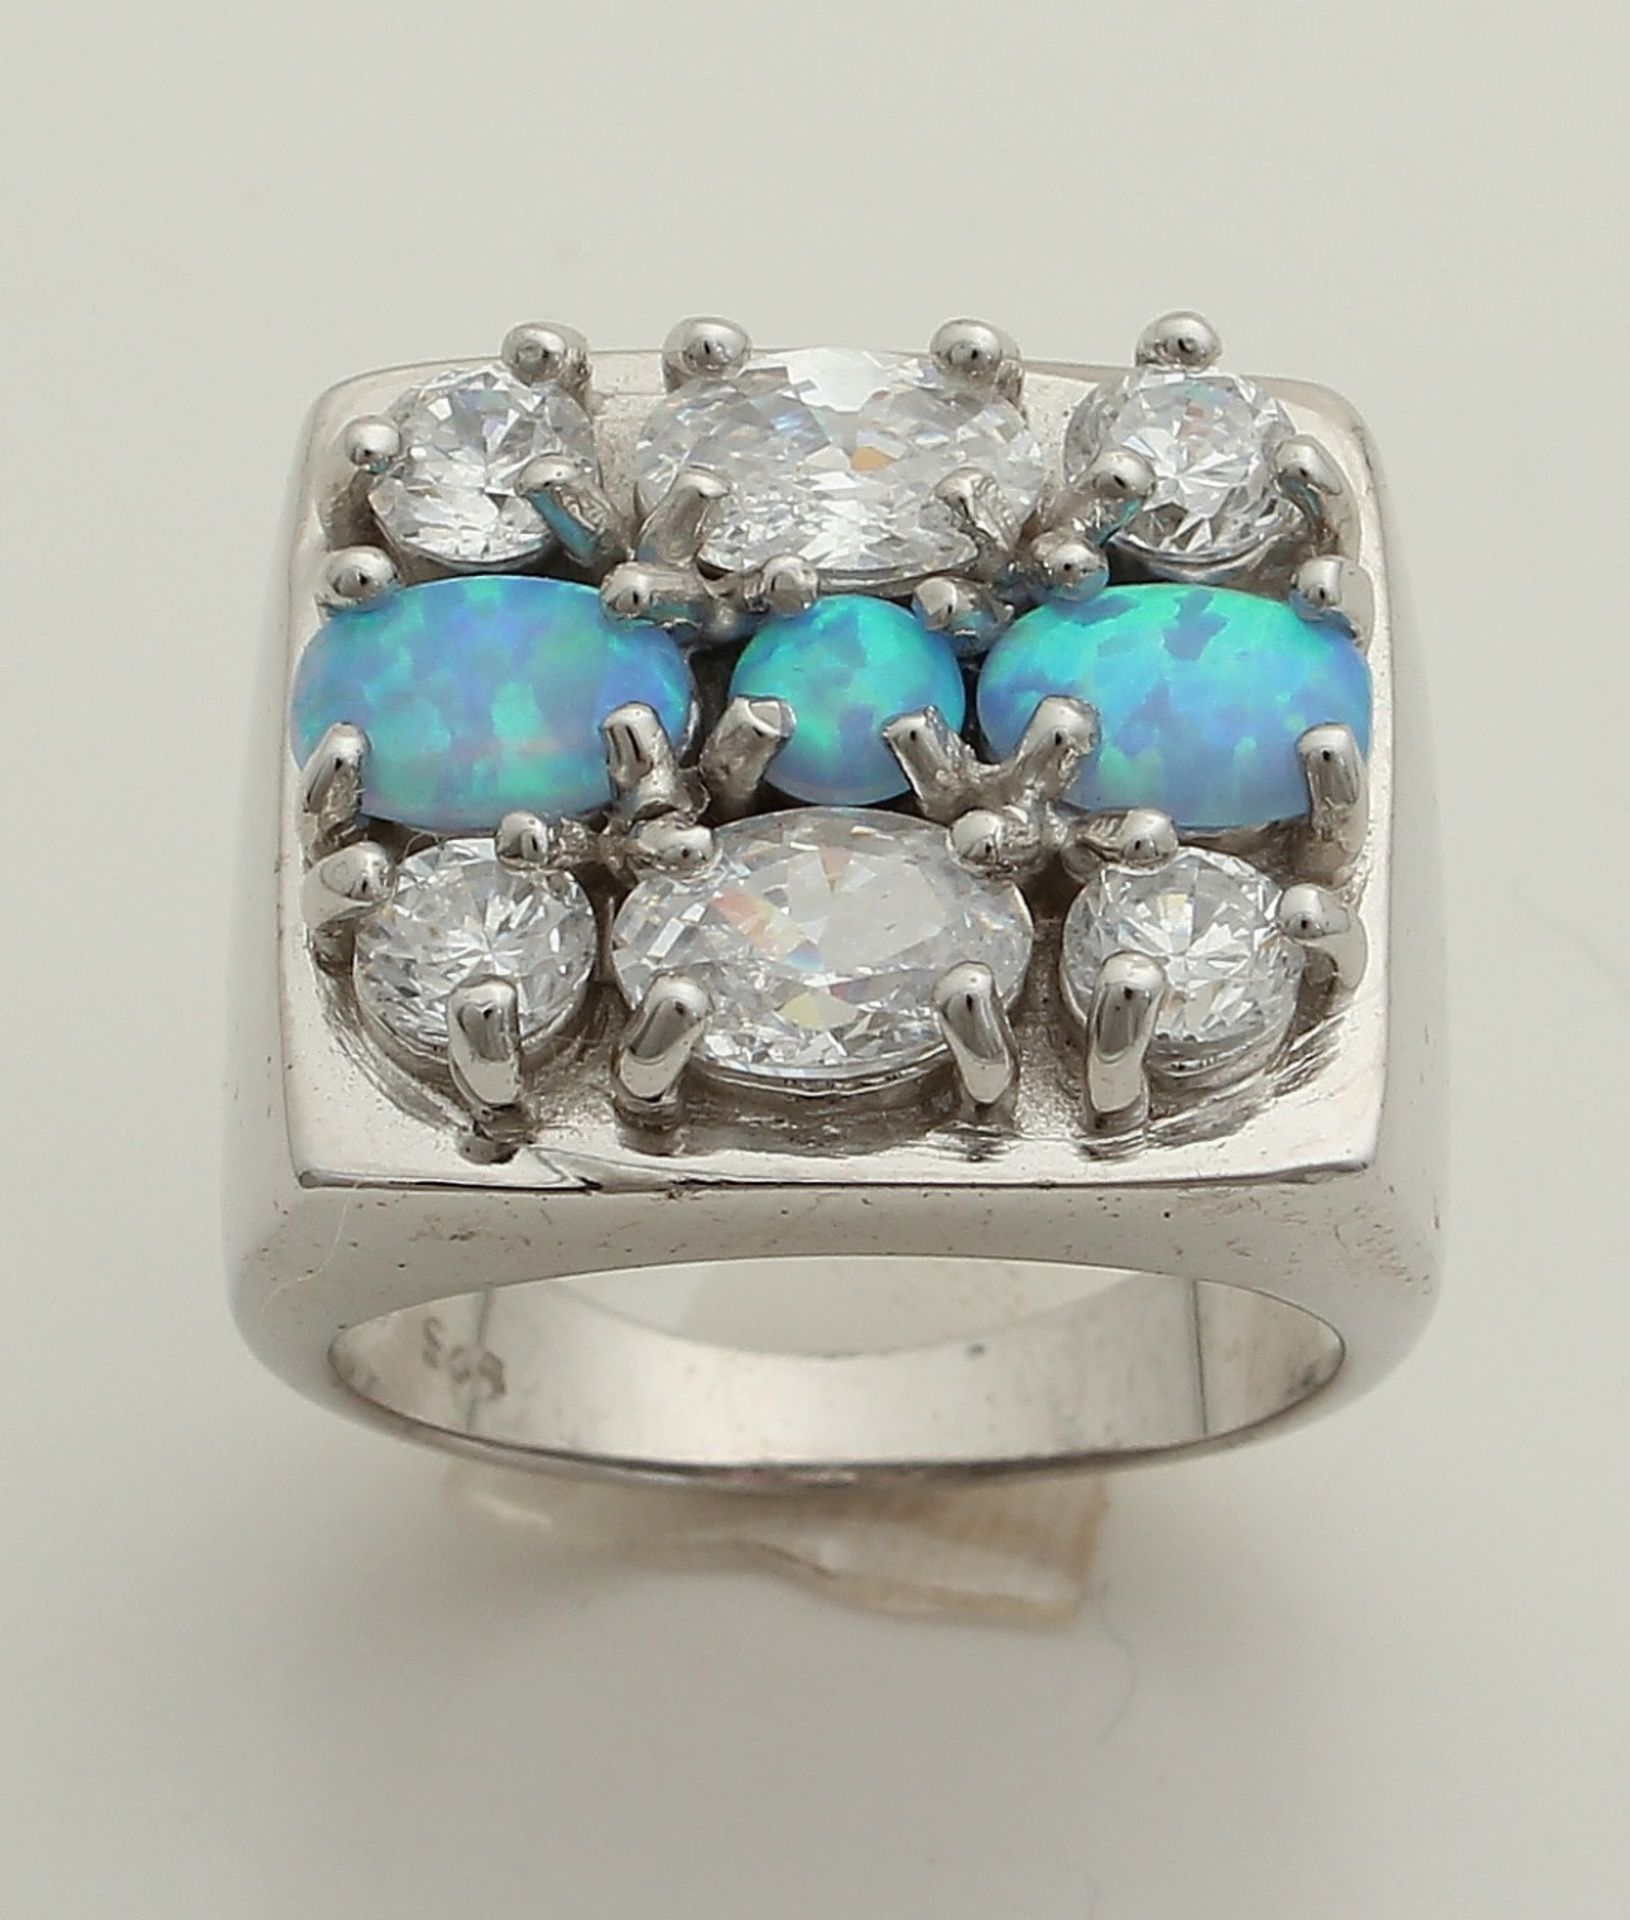 Silver ring with opal and zirconia. Wide silver ring with square head with 3 blue opals and 6